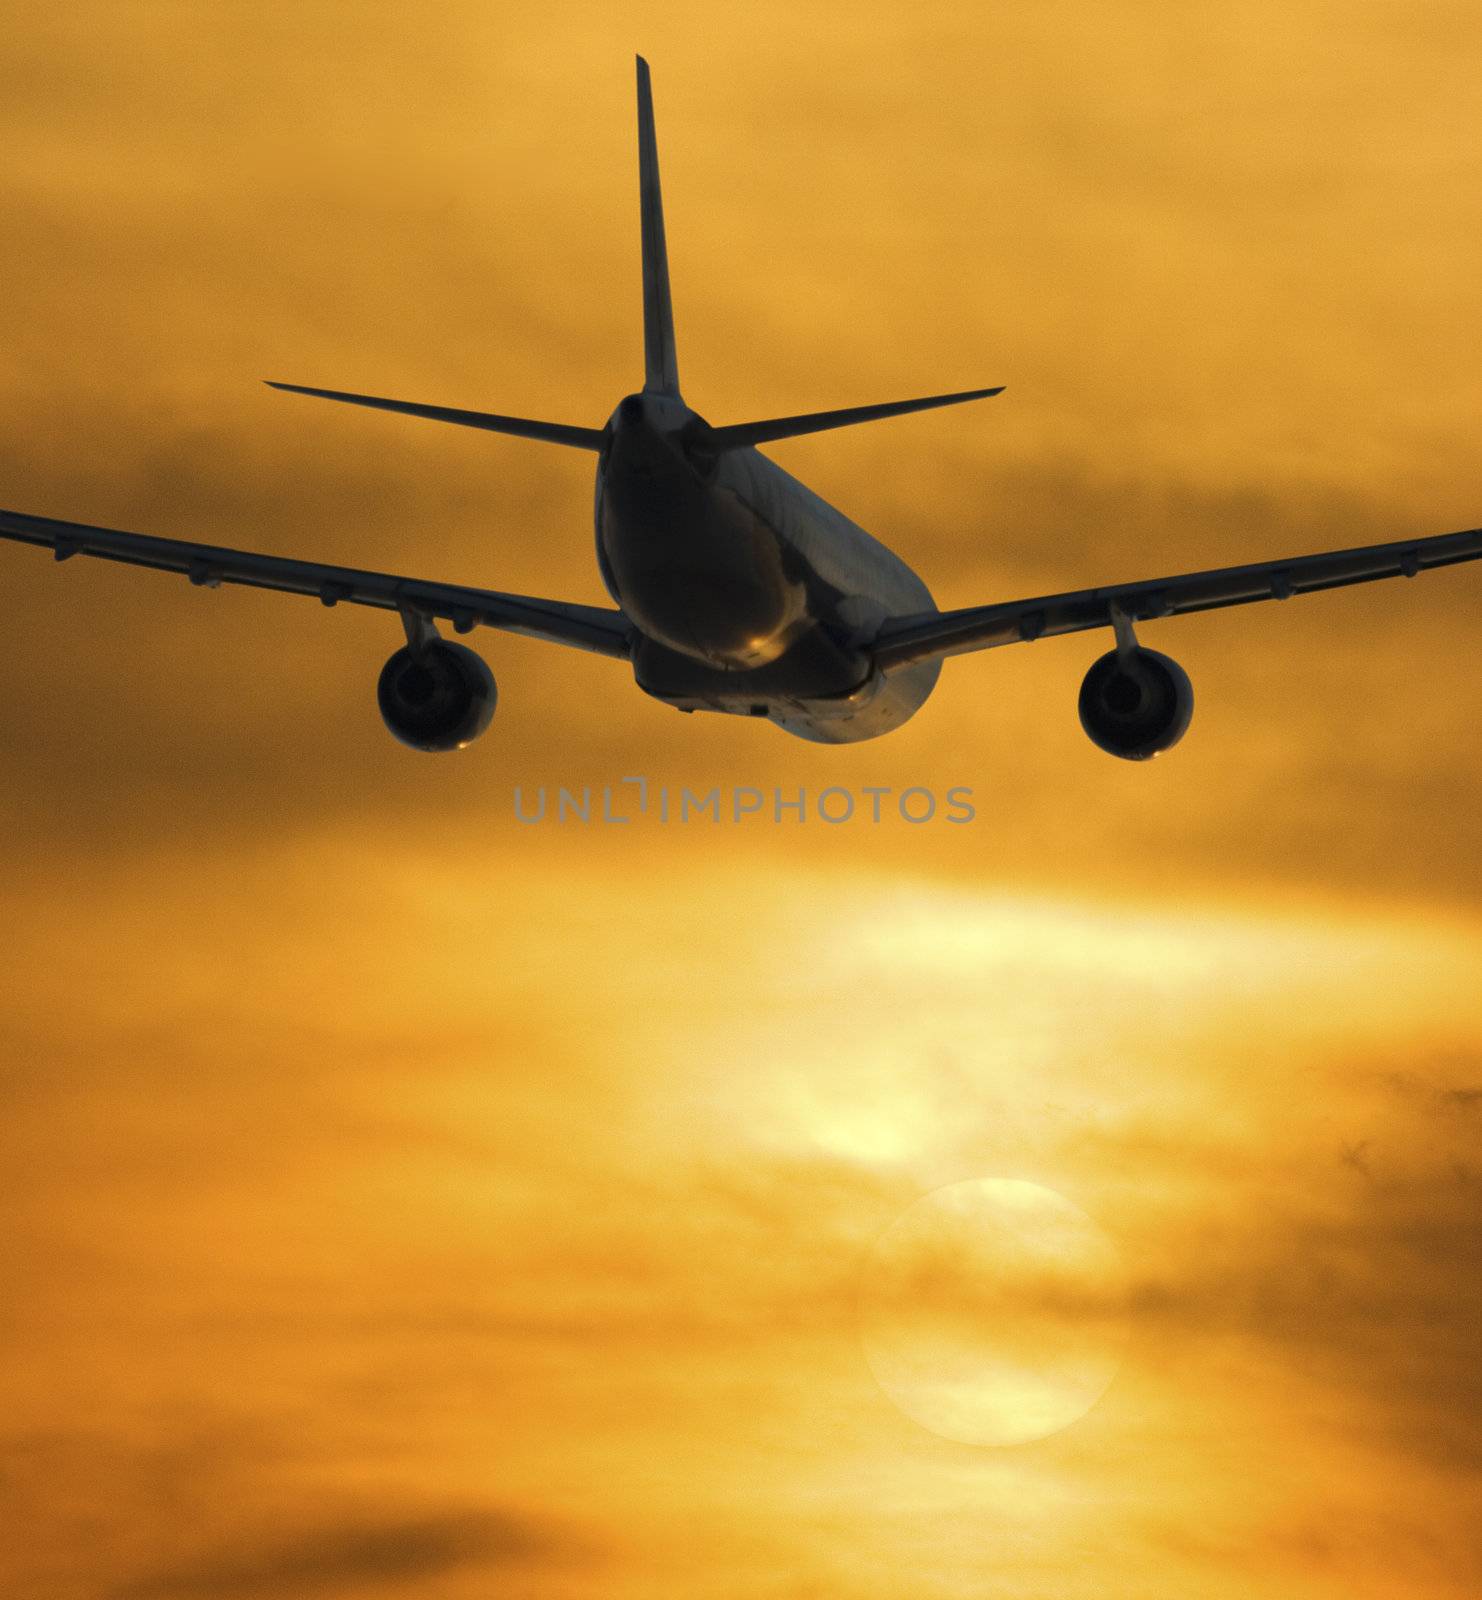 Airplane Flying Towards The Sunset With Passengers Going On Vacation